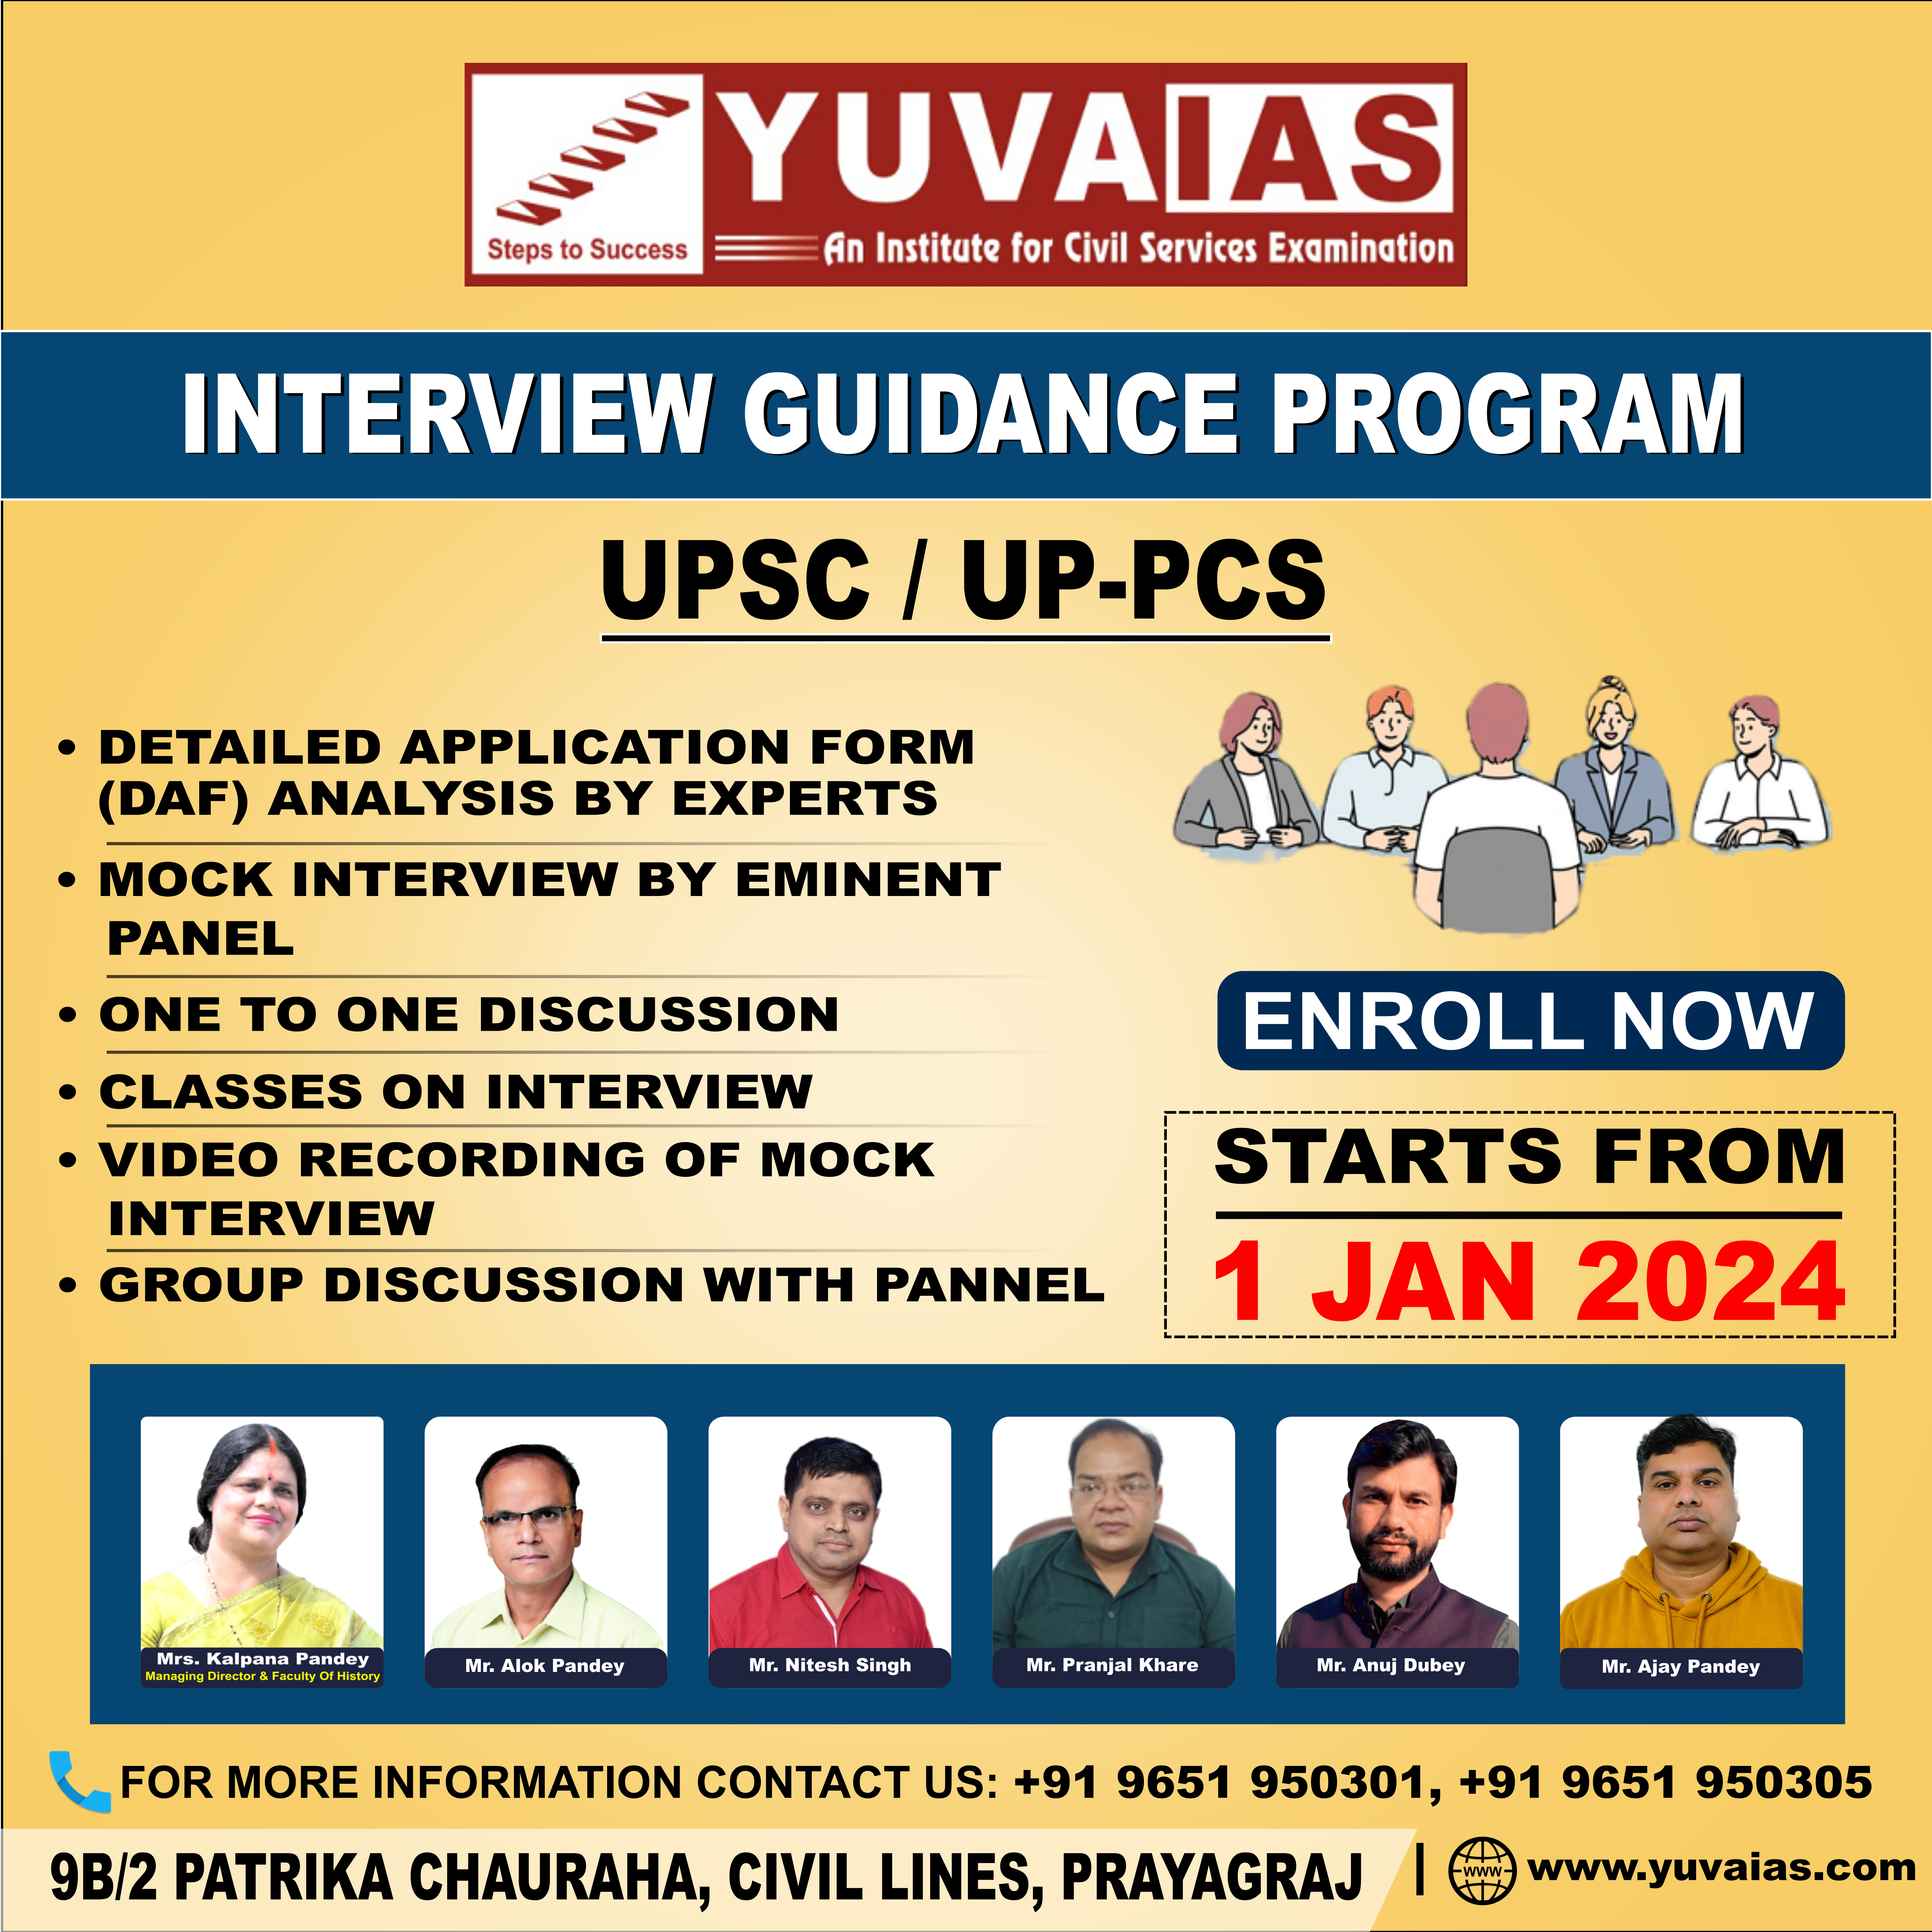 YUVA IAS’s UPSC Interview Guidance Programme is launched